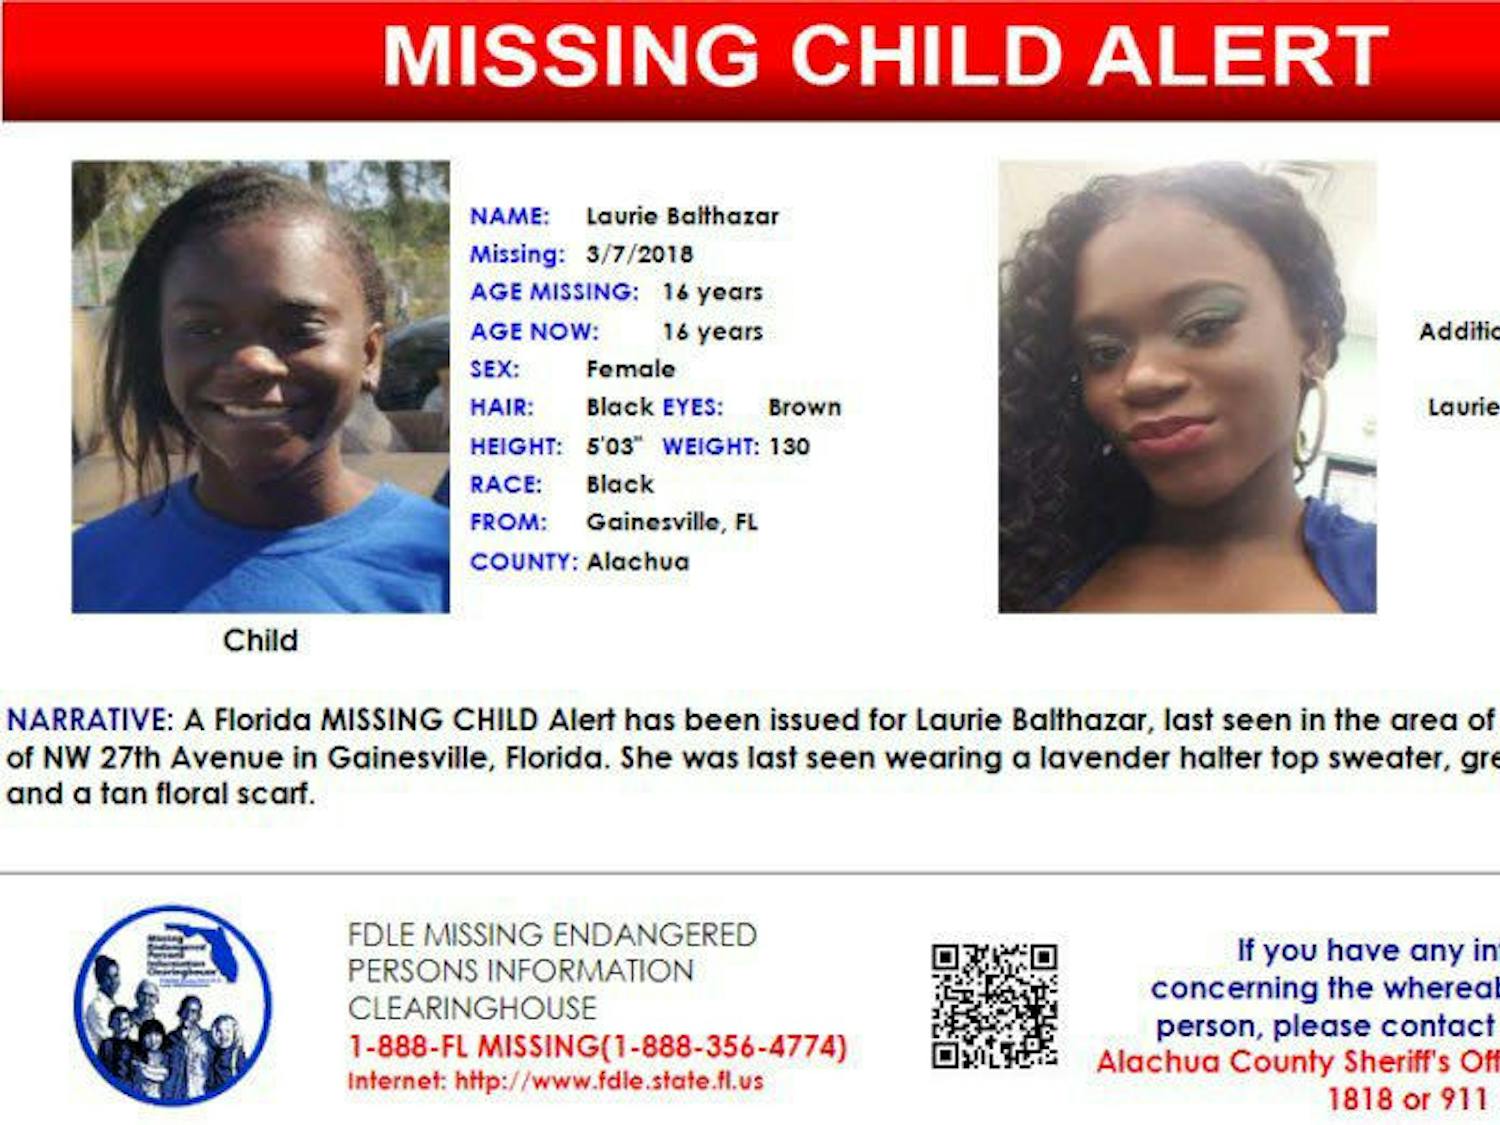 Authorities are looking for Laurie Balthazar, who is described as being 5’3 and weighing 130 pounds. She went missing after she was last seen near the 5000 block of Northwest 27th Avenue, according to the Florida Department of Law Enforcement. She’s described as a black female with black hair and brown eyes.